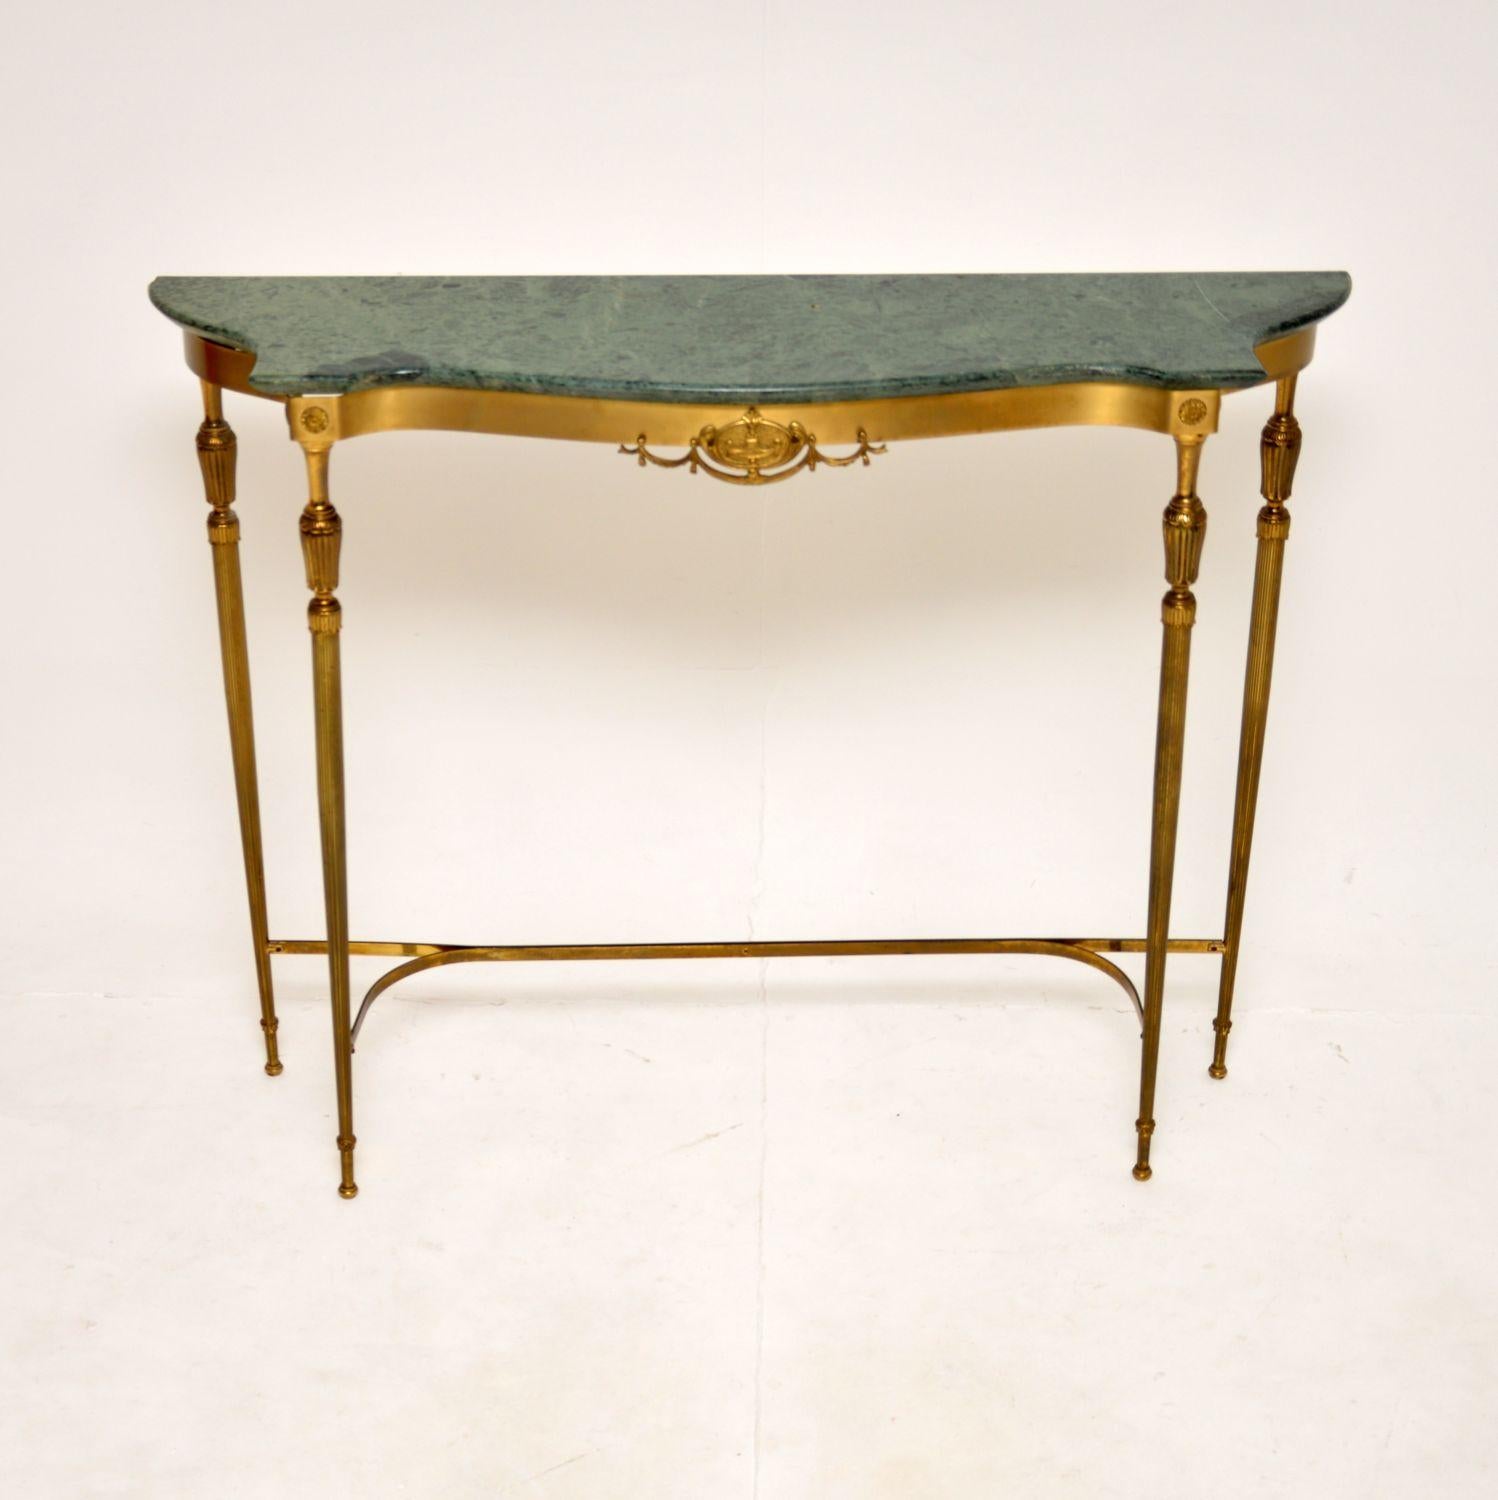 A beautiful and elegant antique French brass and marble console table, dating from around the 1930’s.

It is very well made and has an absolutely gorgeous design. The tapered legs are finely fluted, with lovely embellishments throughout the base.